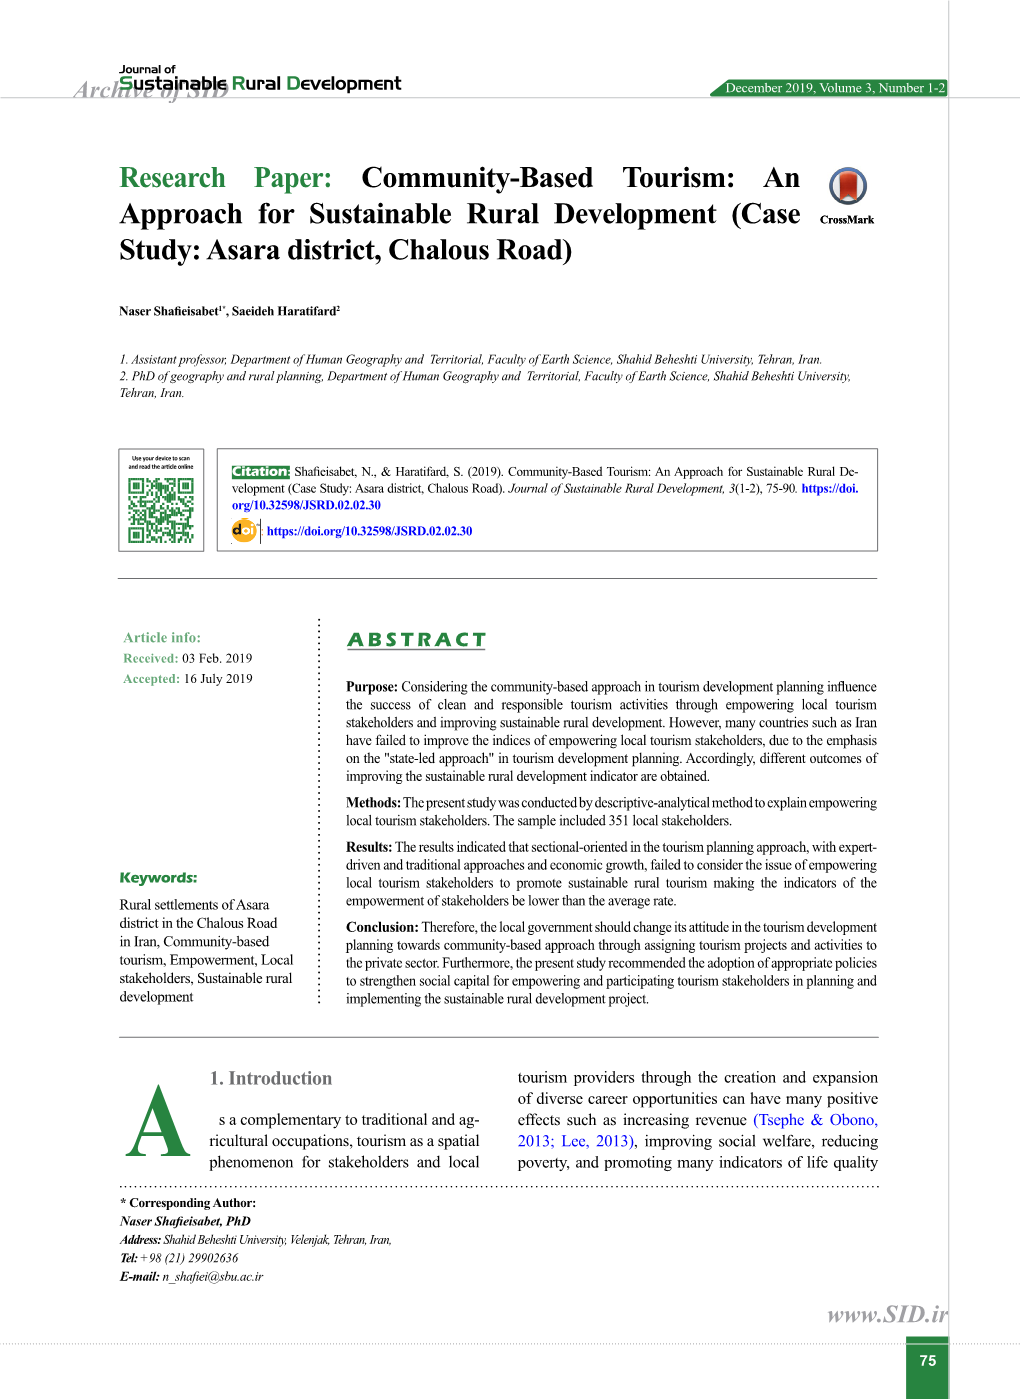 An Approach for Sustainable Rural Development (Case Crossmark Study: Asara District, Chalous Road)